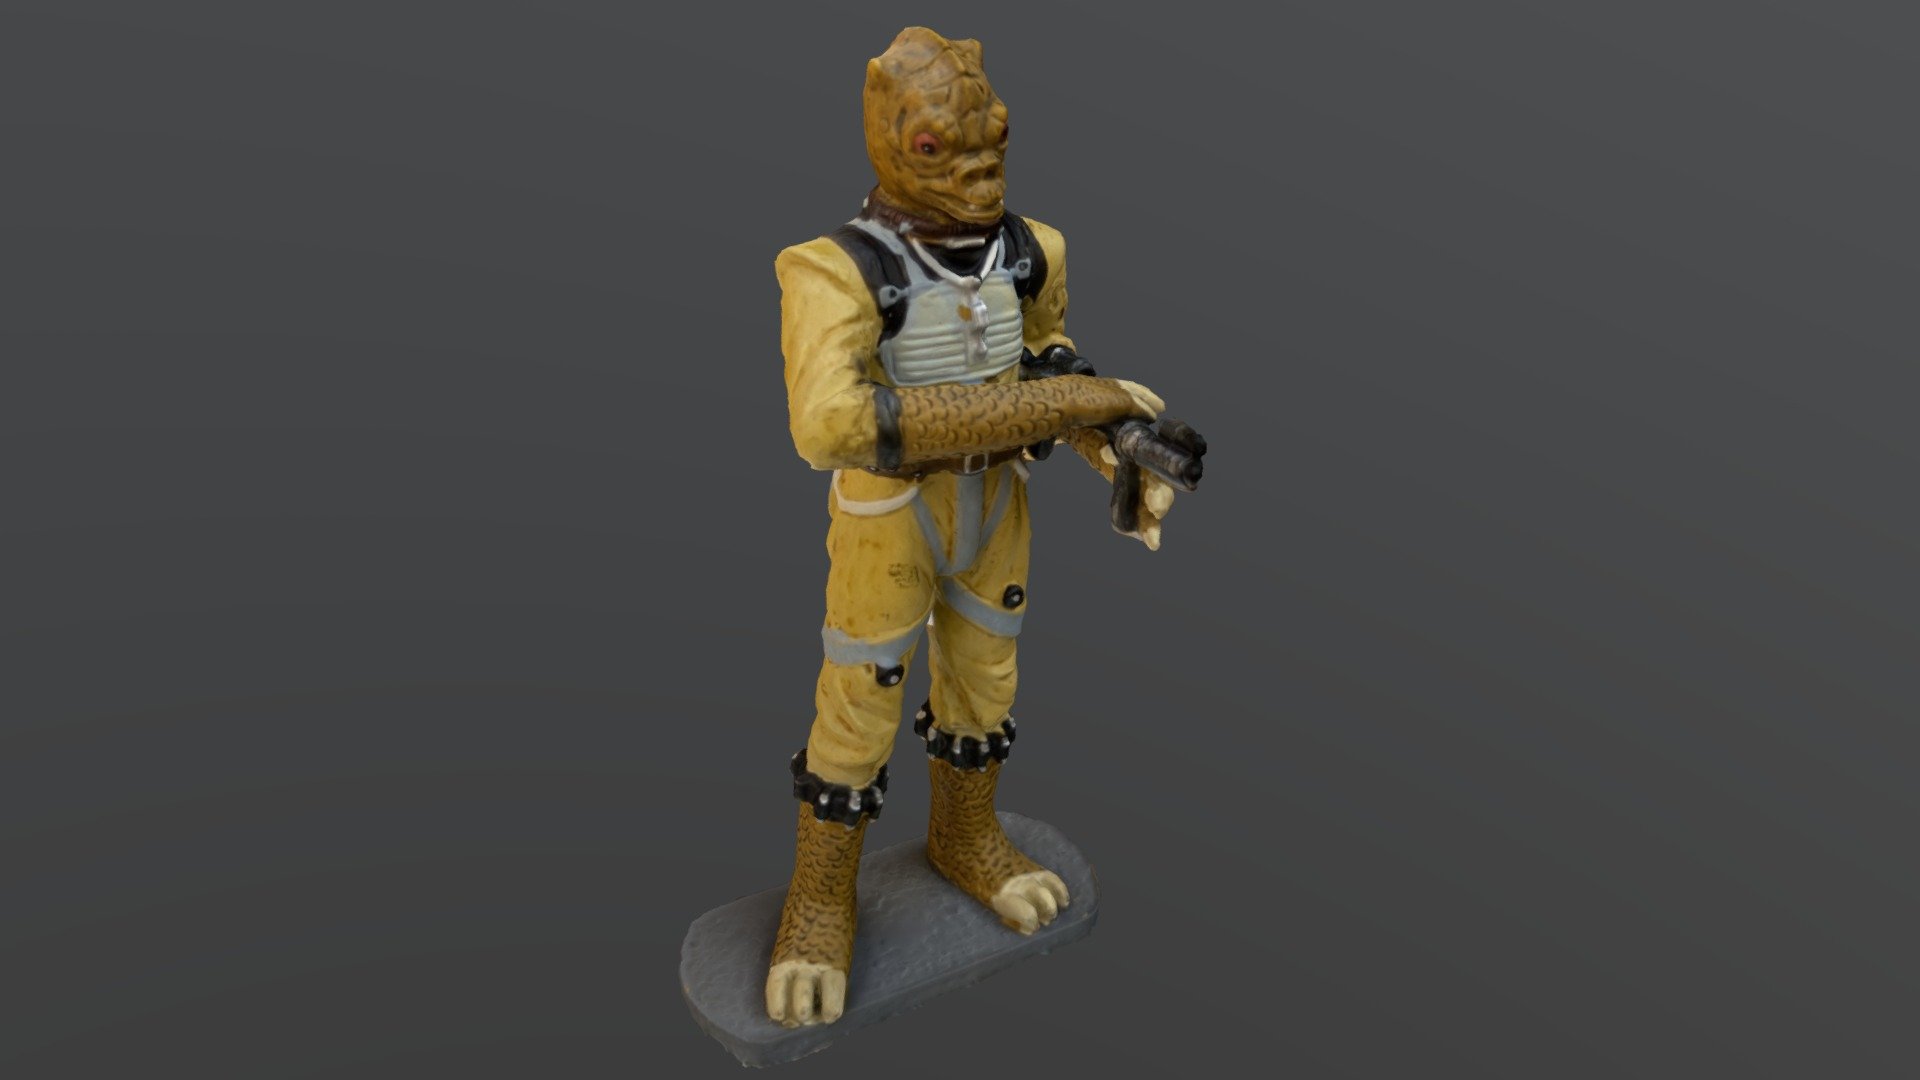 A miniature lead statue of Bossk, a character from the Star Wars franchise, captured with RealityScan photogrammetry software 3d model